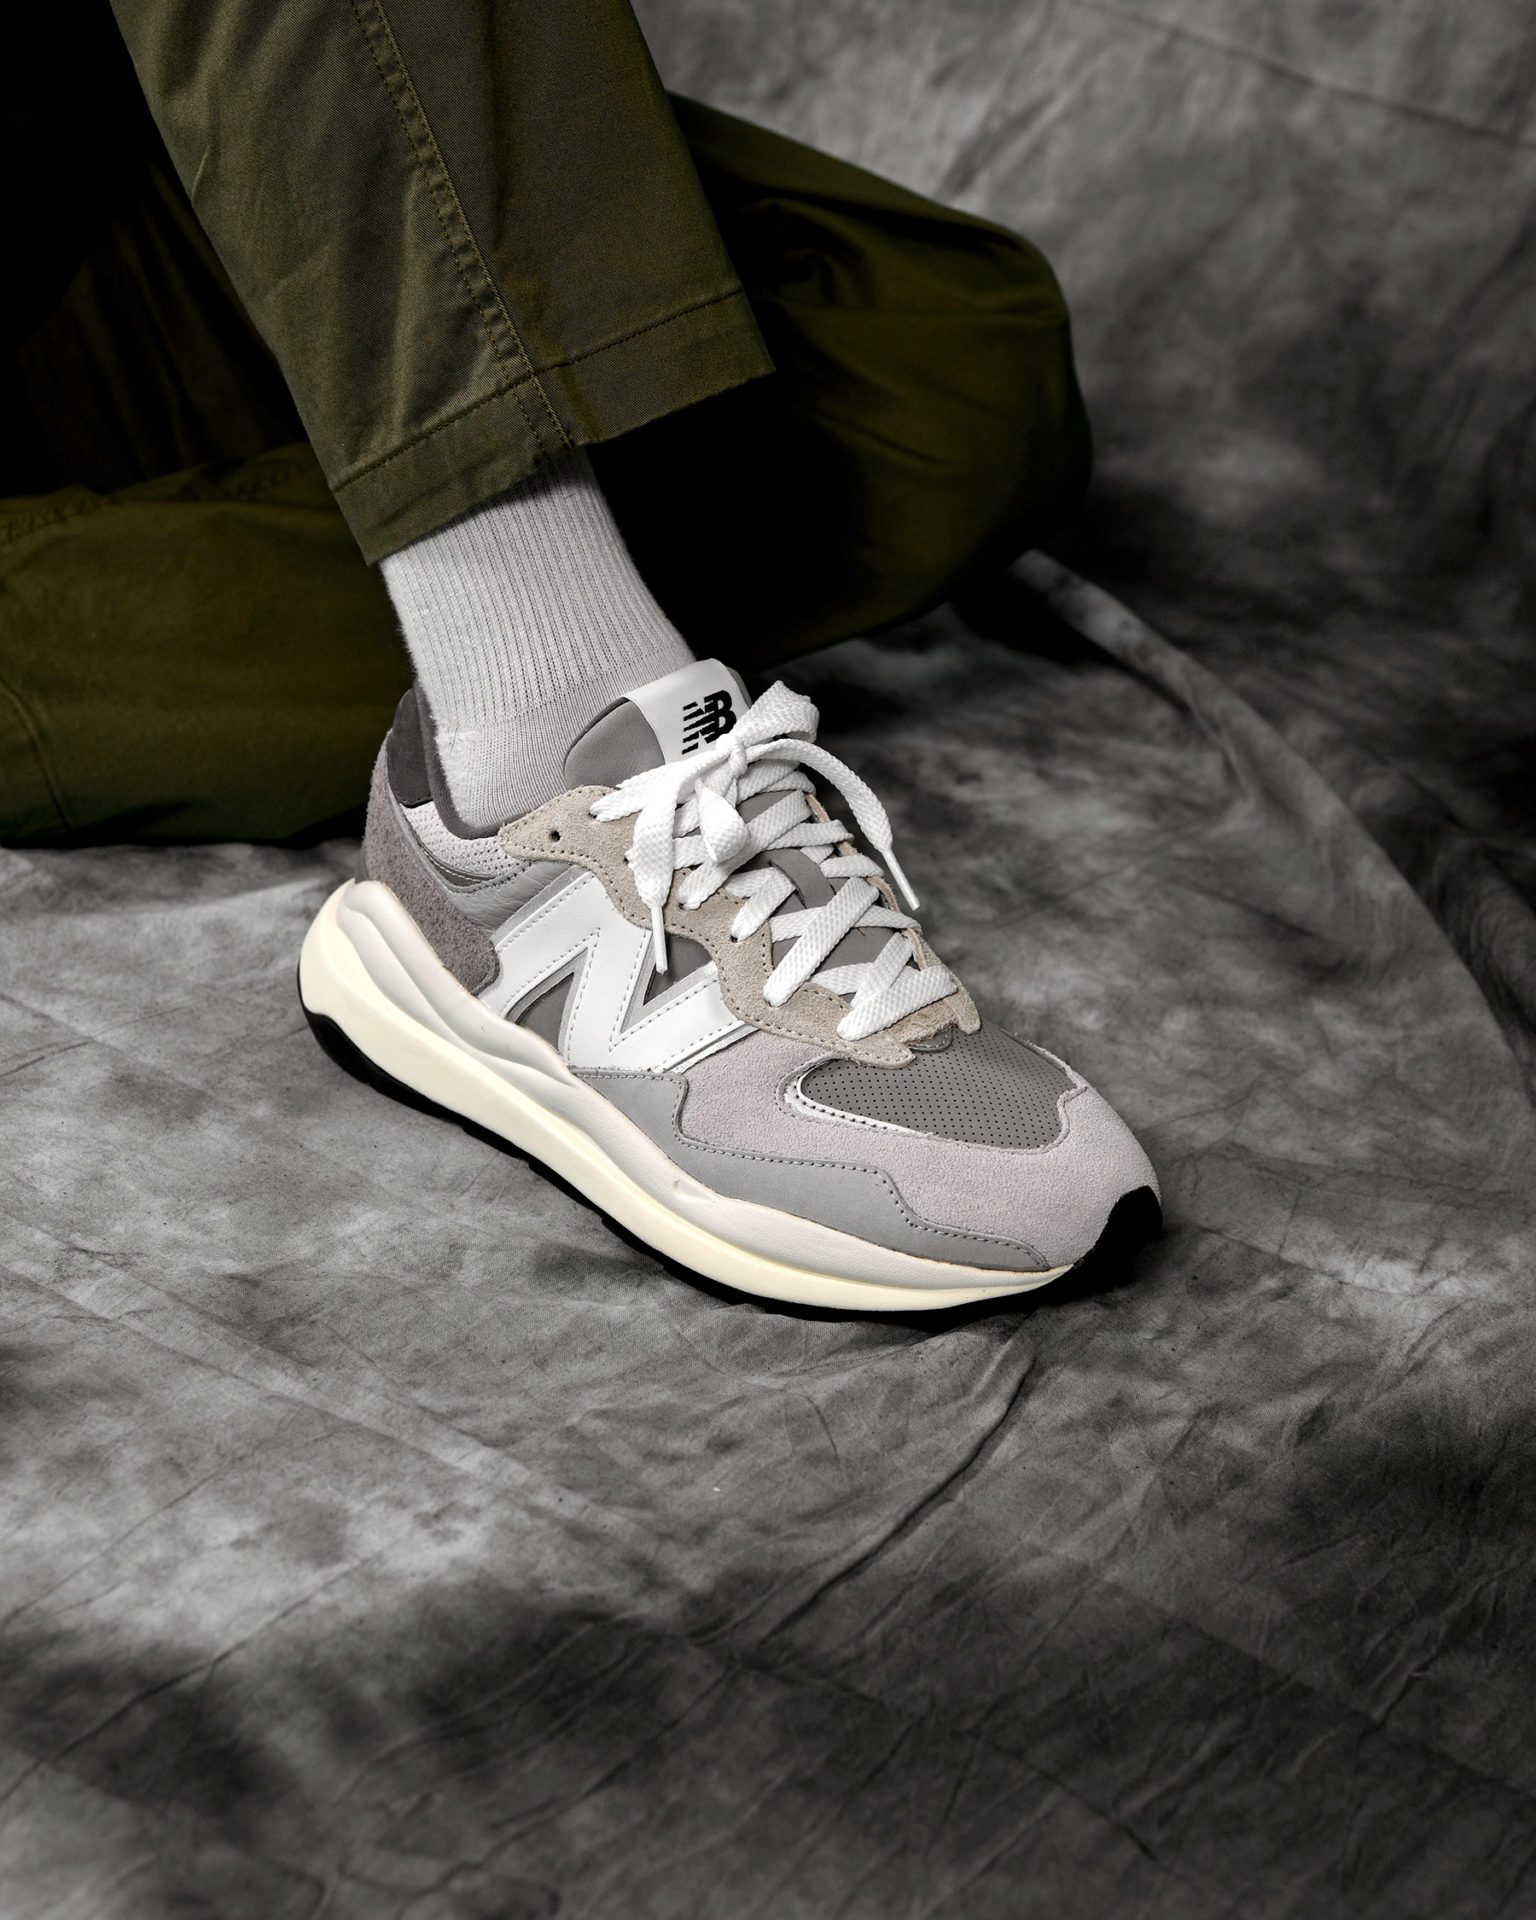 New Balance 57/40 Sneakers In Off White Exclusive To ASOS